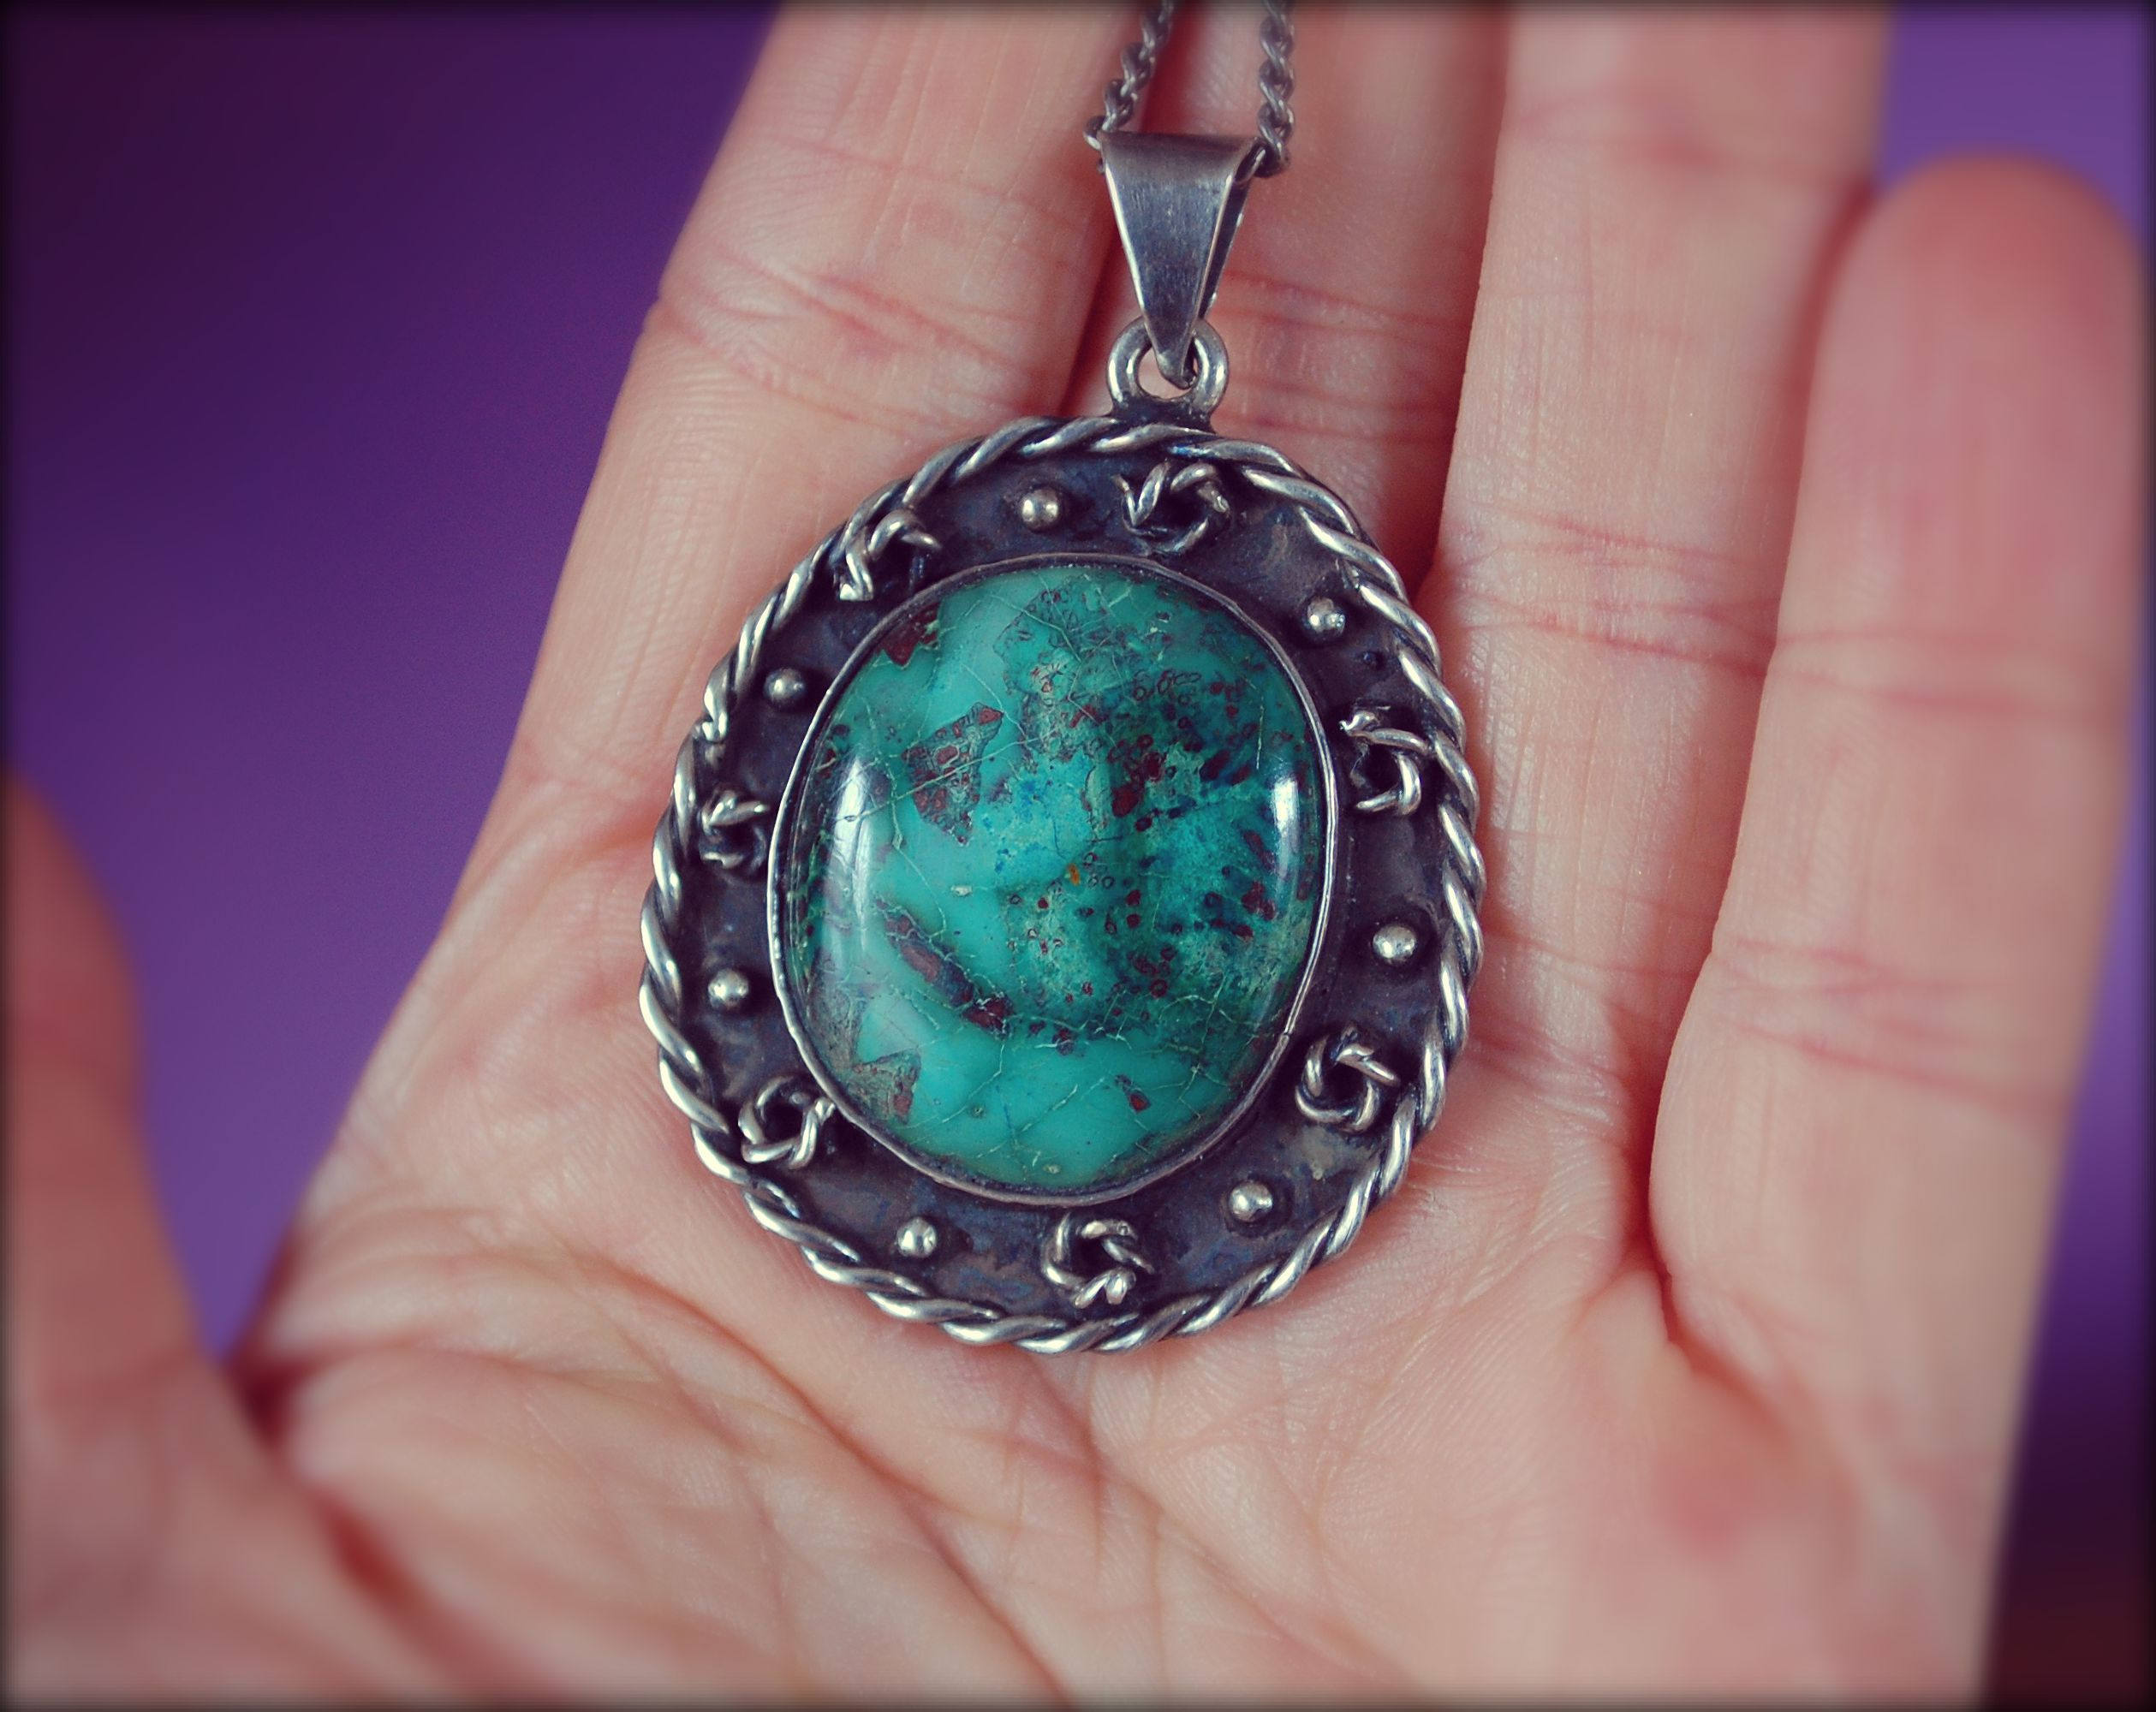 Native American Turquoise Pendant Necklace  - Boho Turquoise Pendant with Sterling Silver Chain